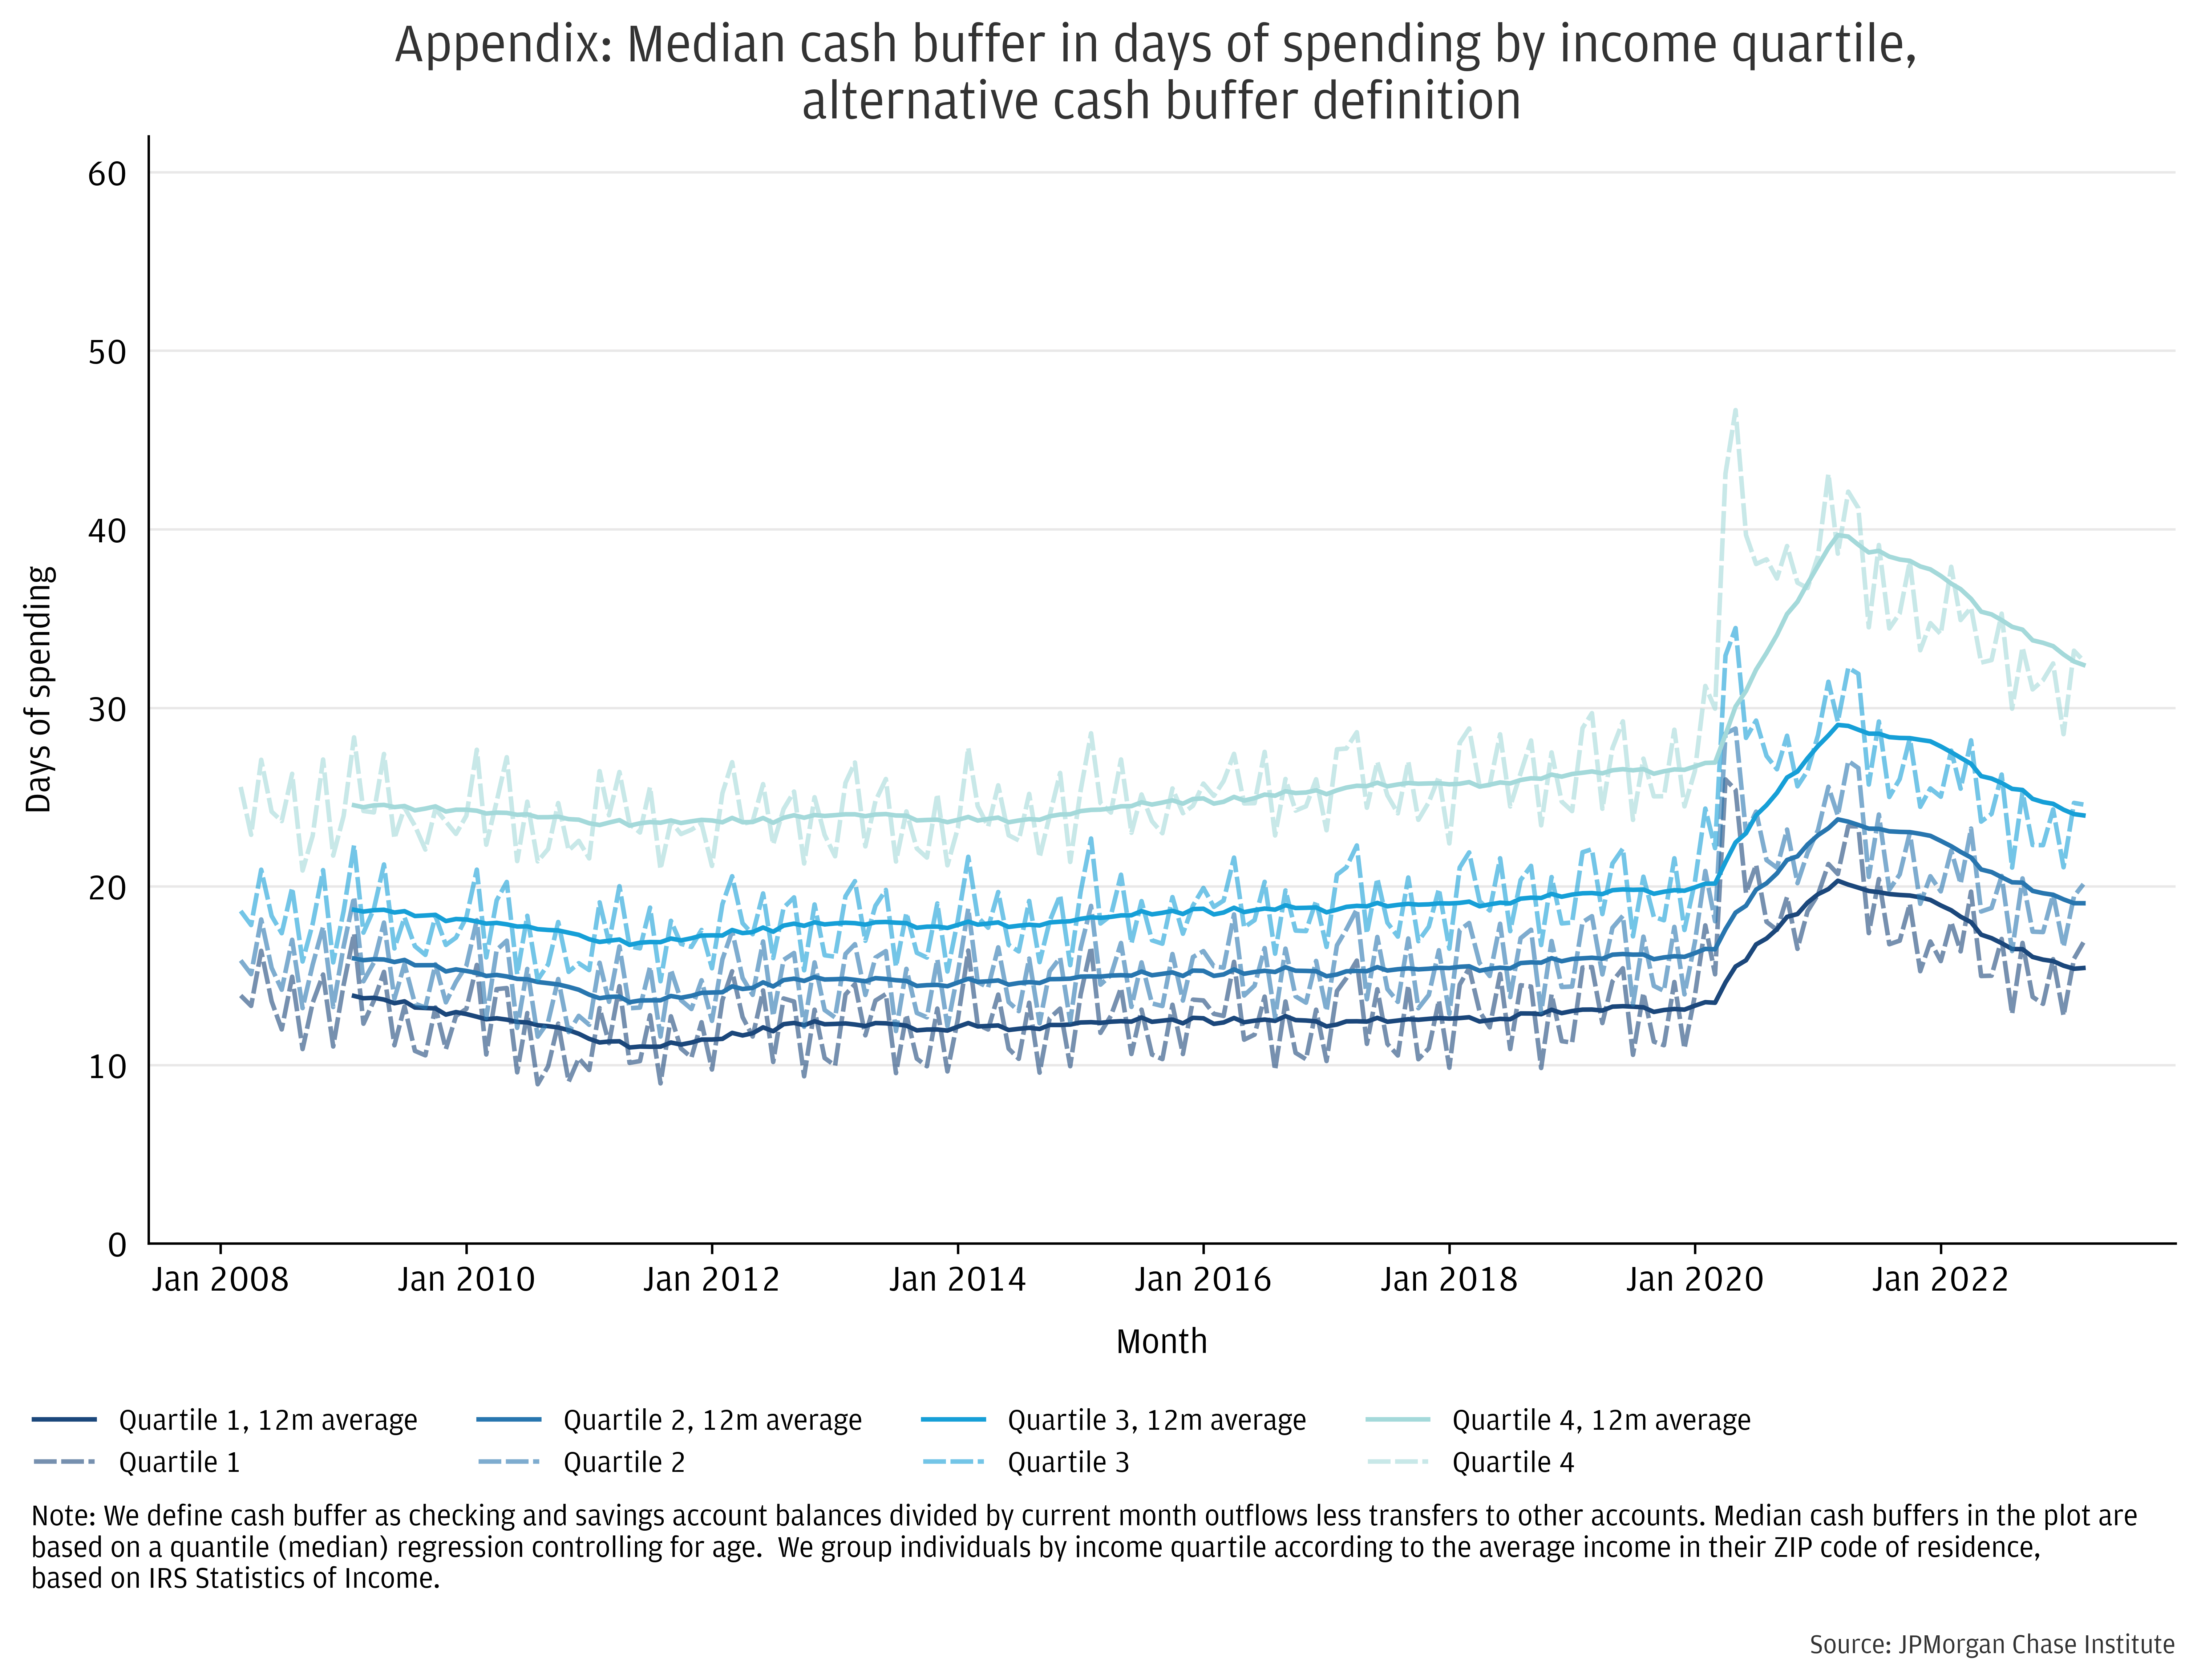 Median Cash Buffer in Days of Spending by Income Quartile